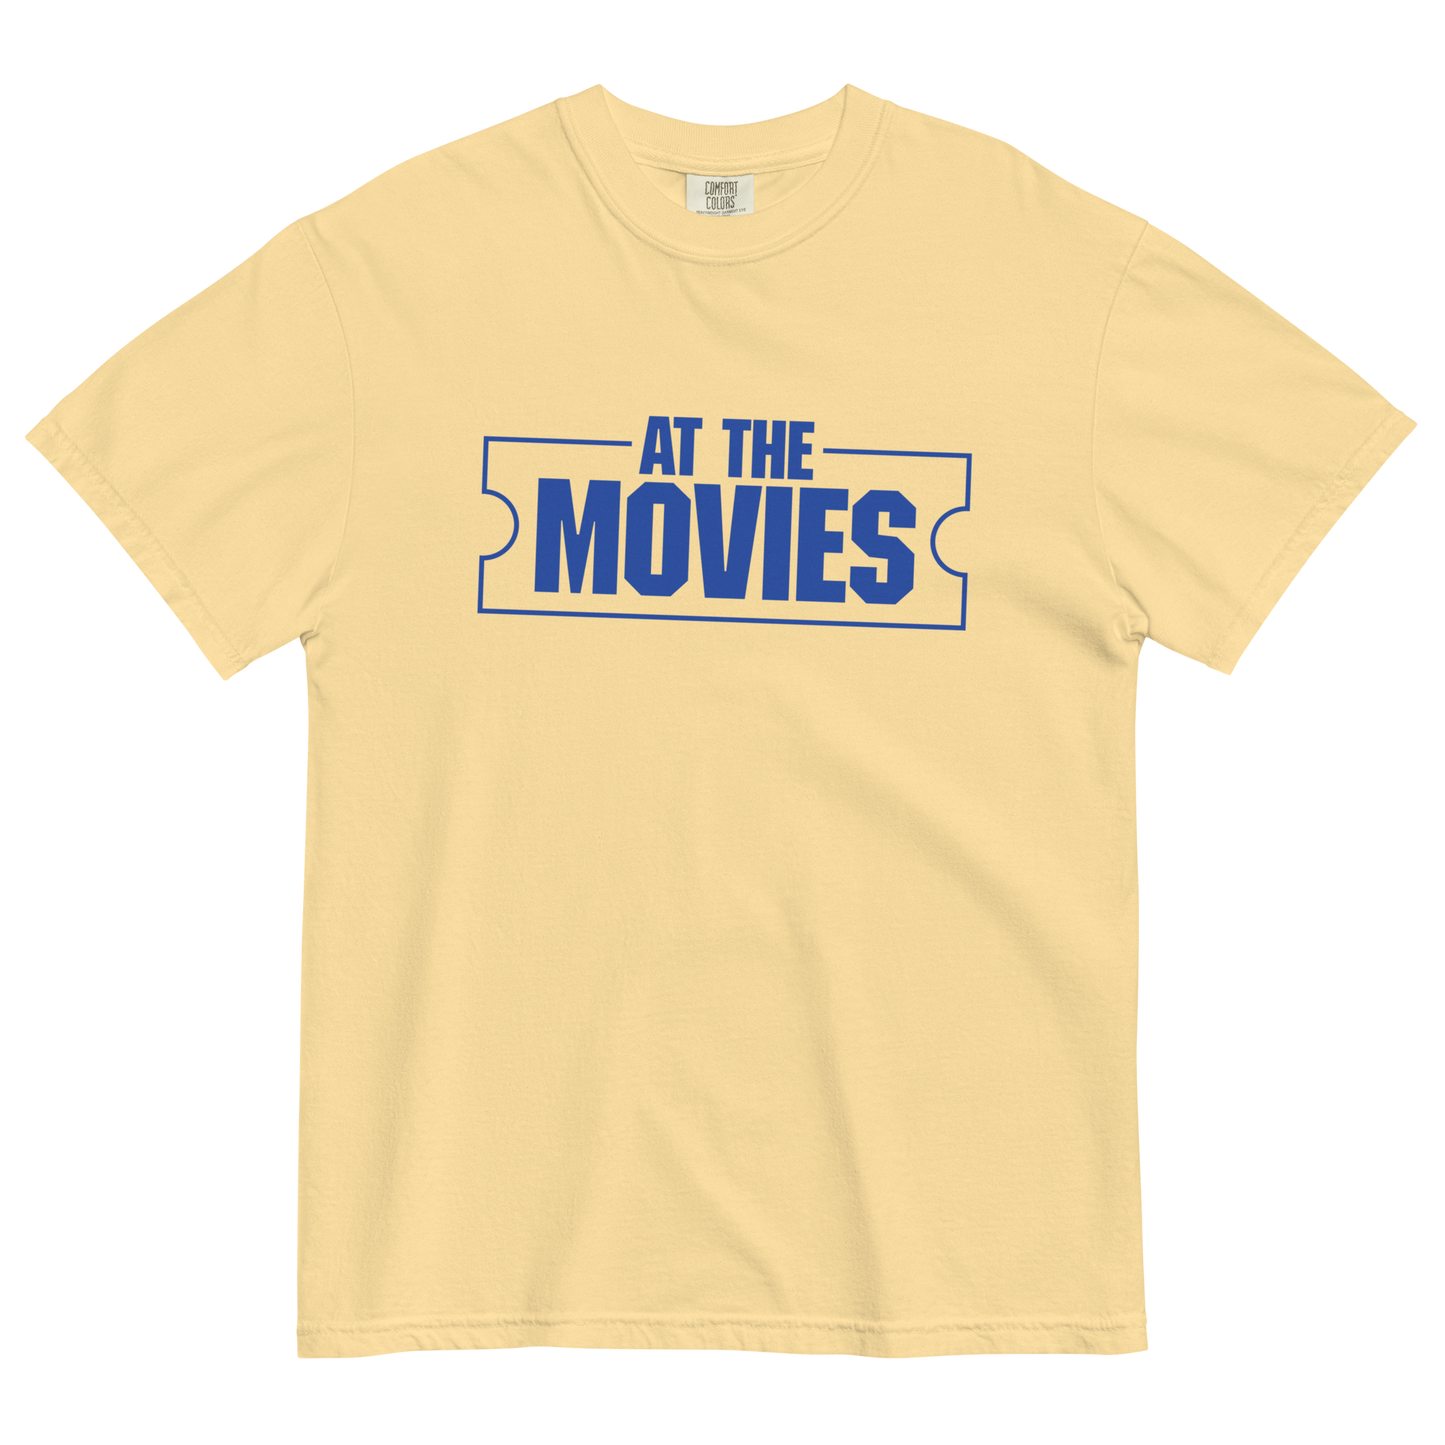 At the Movies "Golden Ticket" Short-Sleeve Tee